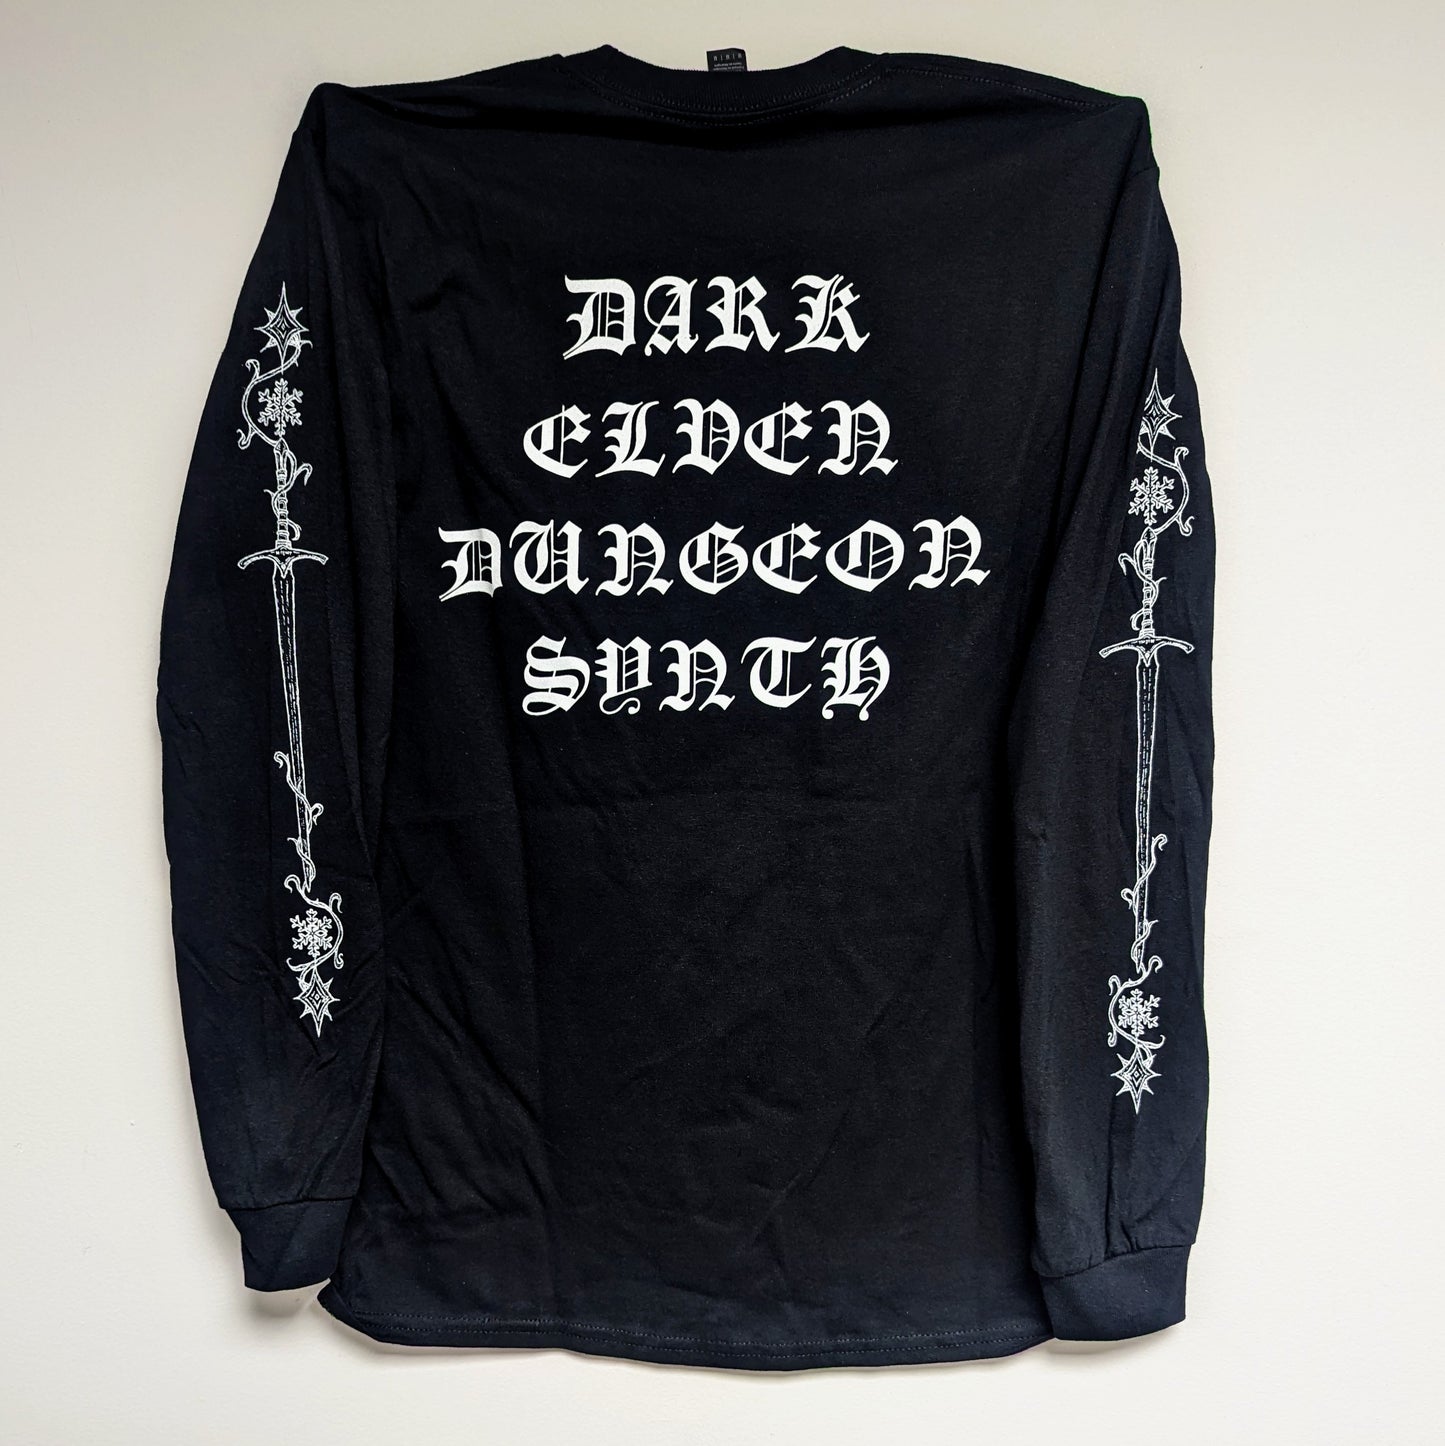 FROSTGARD "Dark Elven Dungeon Synth" 4-Sided Long Sleeve Shirt [BLACK]